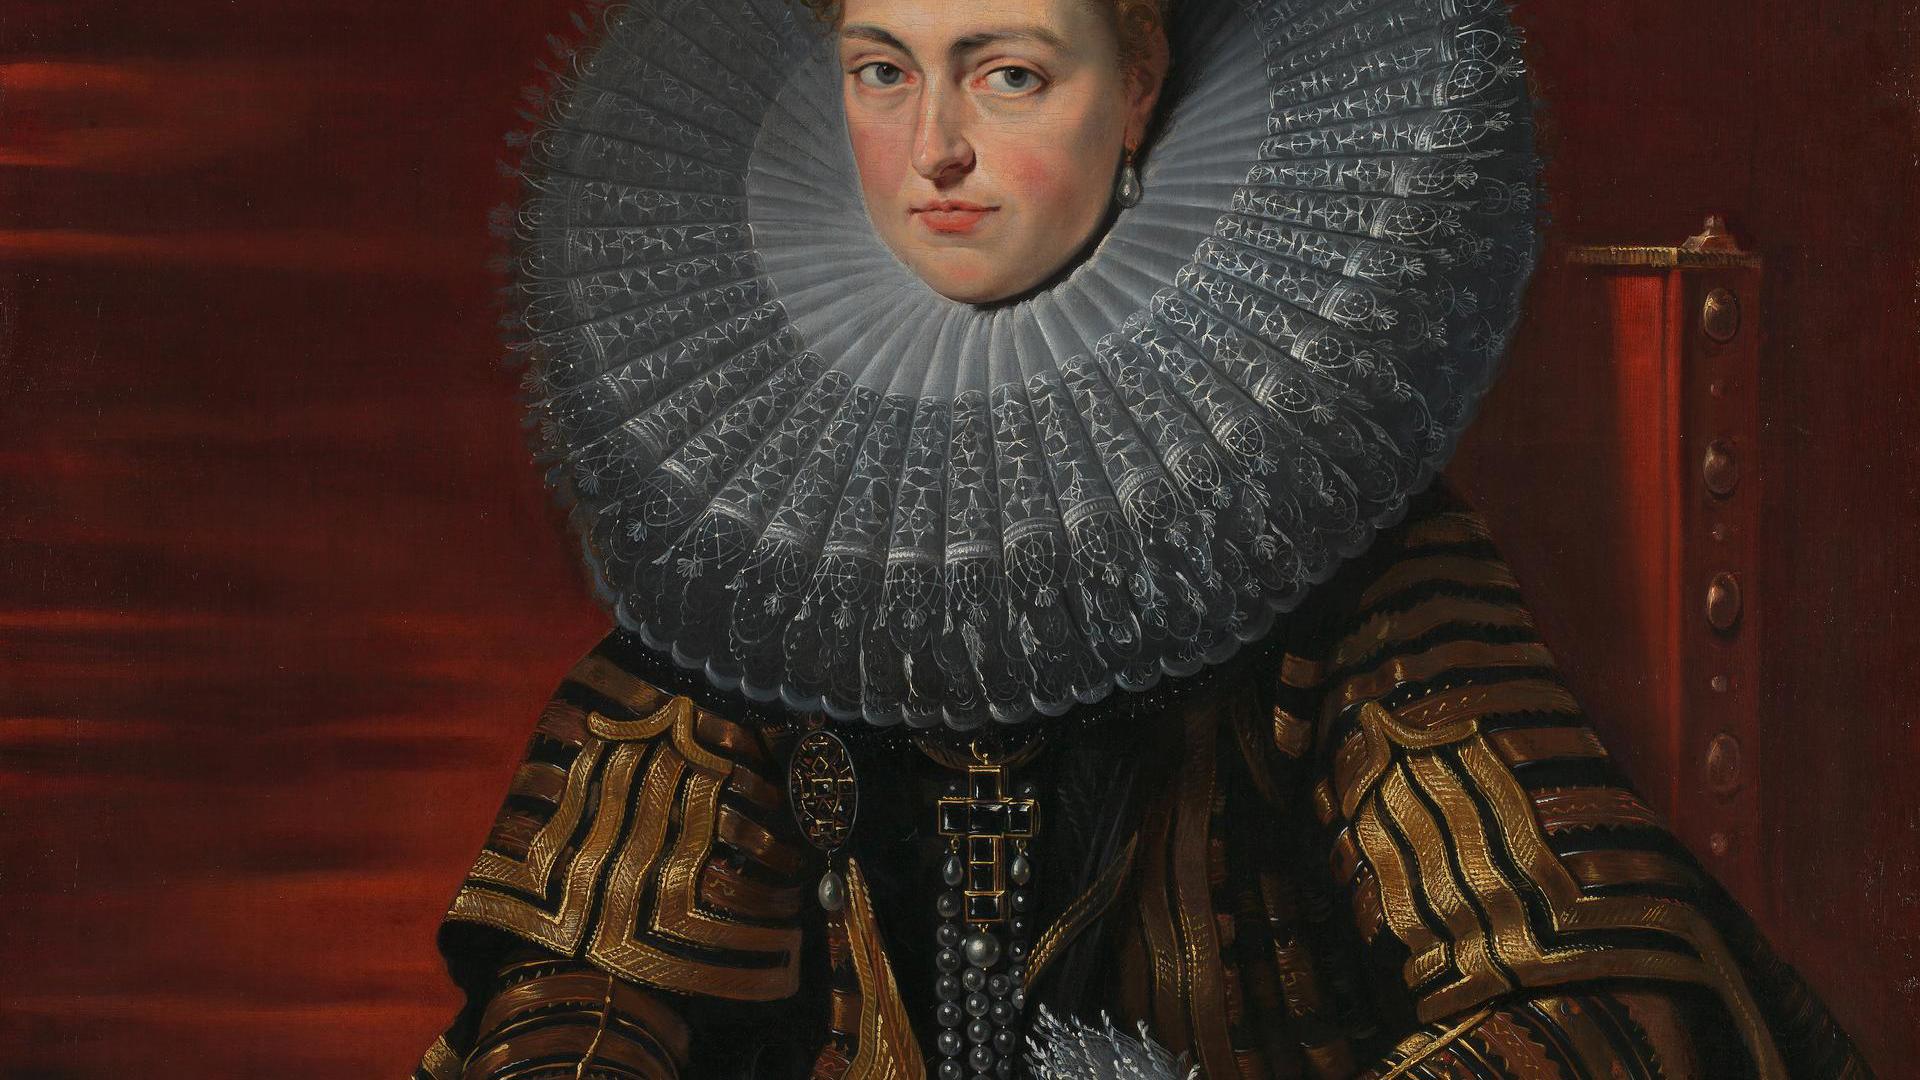 Portrait of the Infanta Isabella by Studio of Peter Paul Rubens